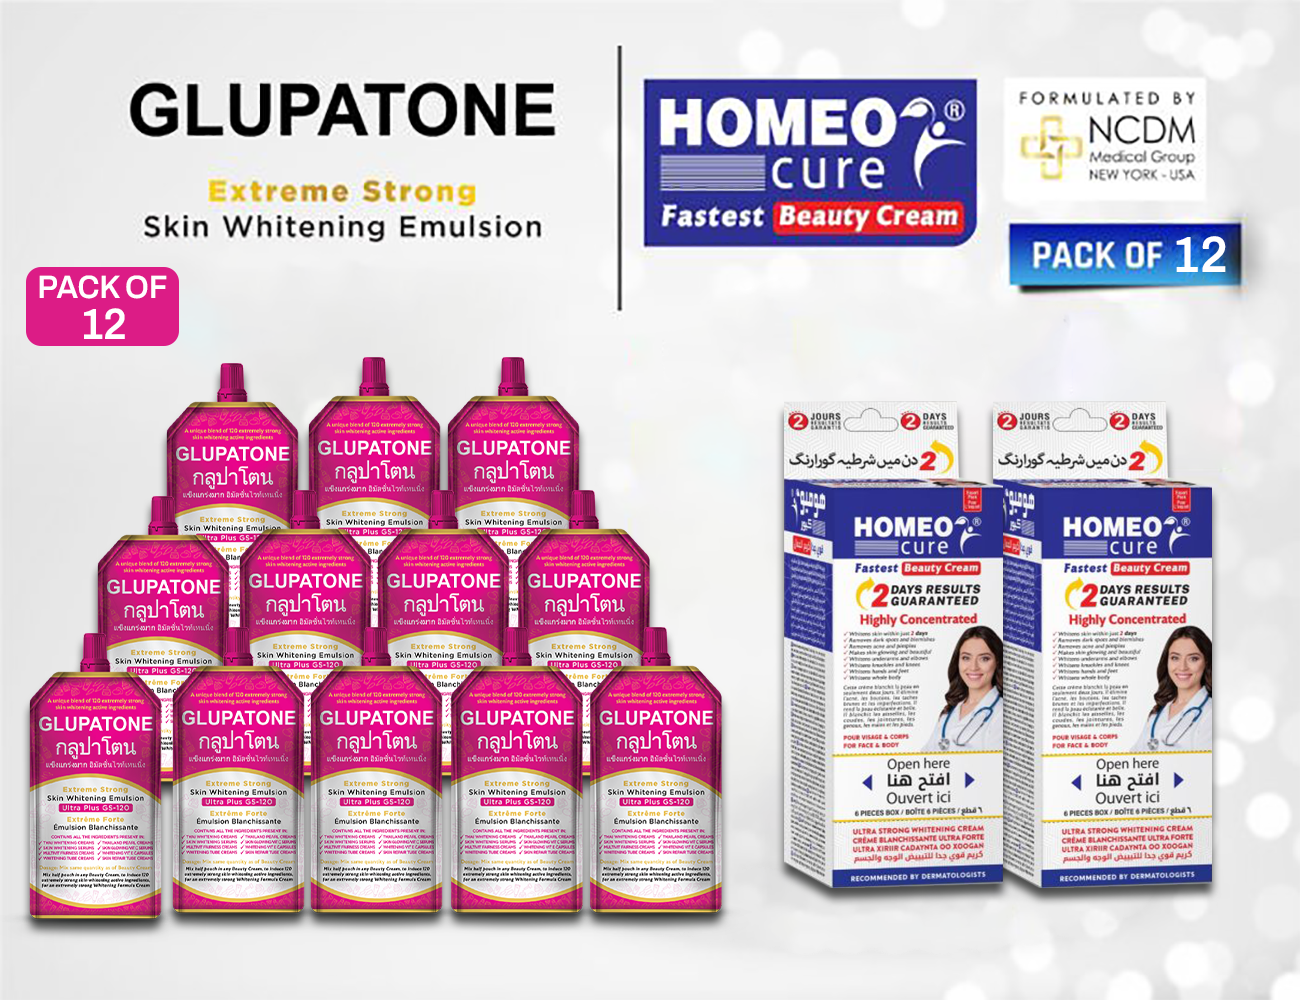 GLUPATONE Extreme Strong Whitening Emulsion 50 ml & homeo cure pack of 12